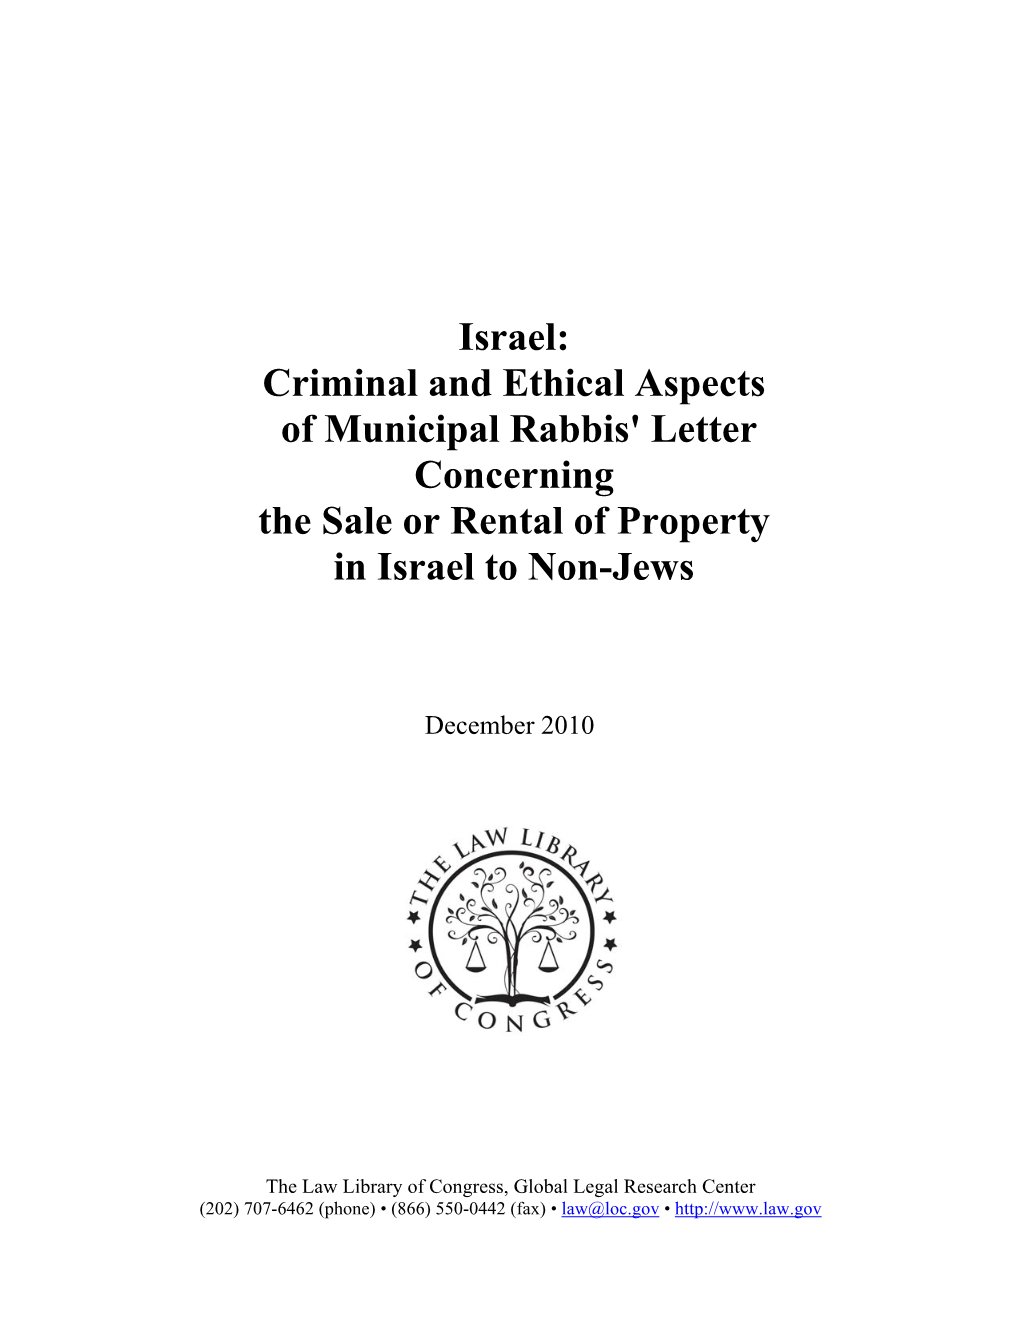 Israel: Criminal and Ethical Aspects of Municipal Rabbis' Letter Concerning the Sale Or Rental of Property in Israel to Non-Jews